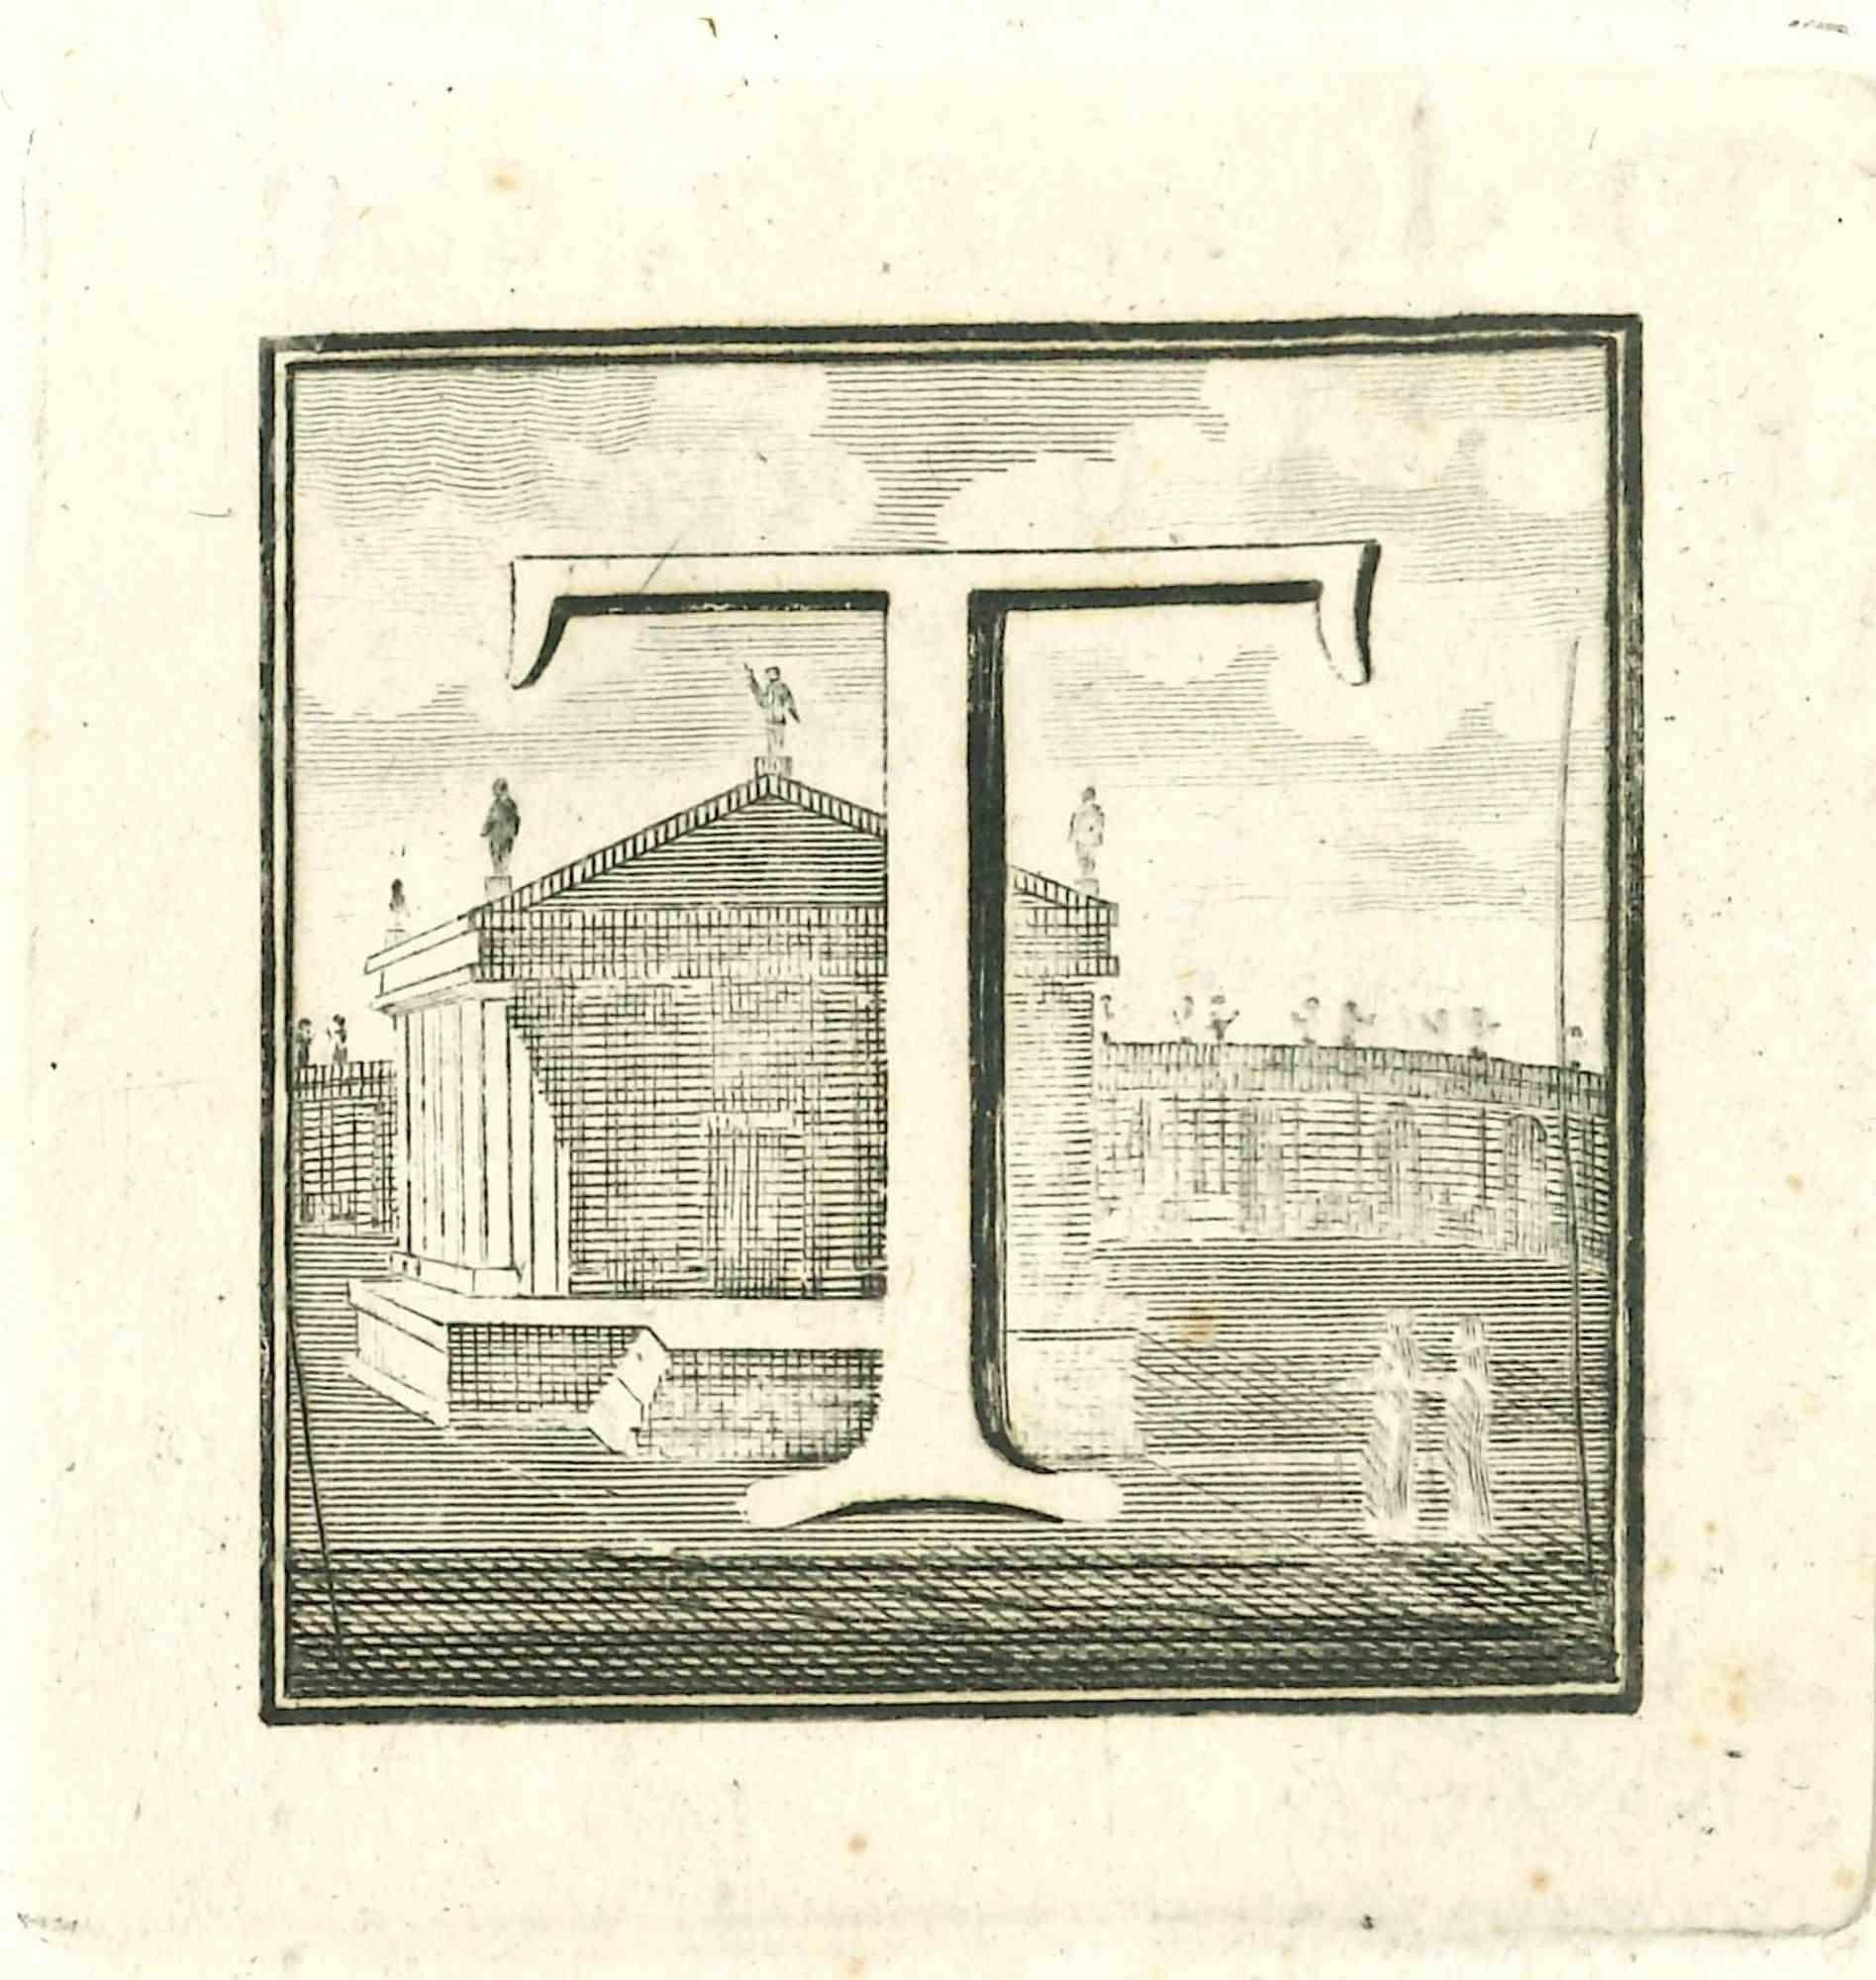 Unknown Figurative Print - Capital Letter T - Original Etching  - 18th Century